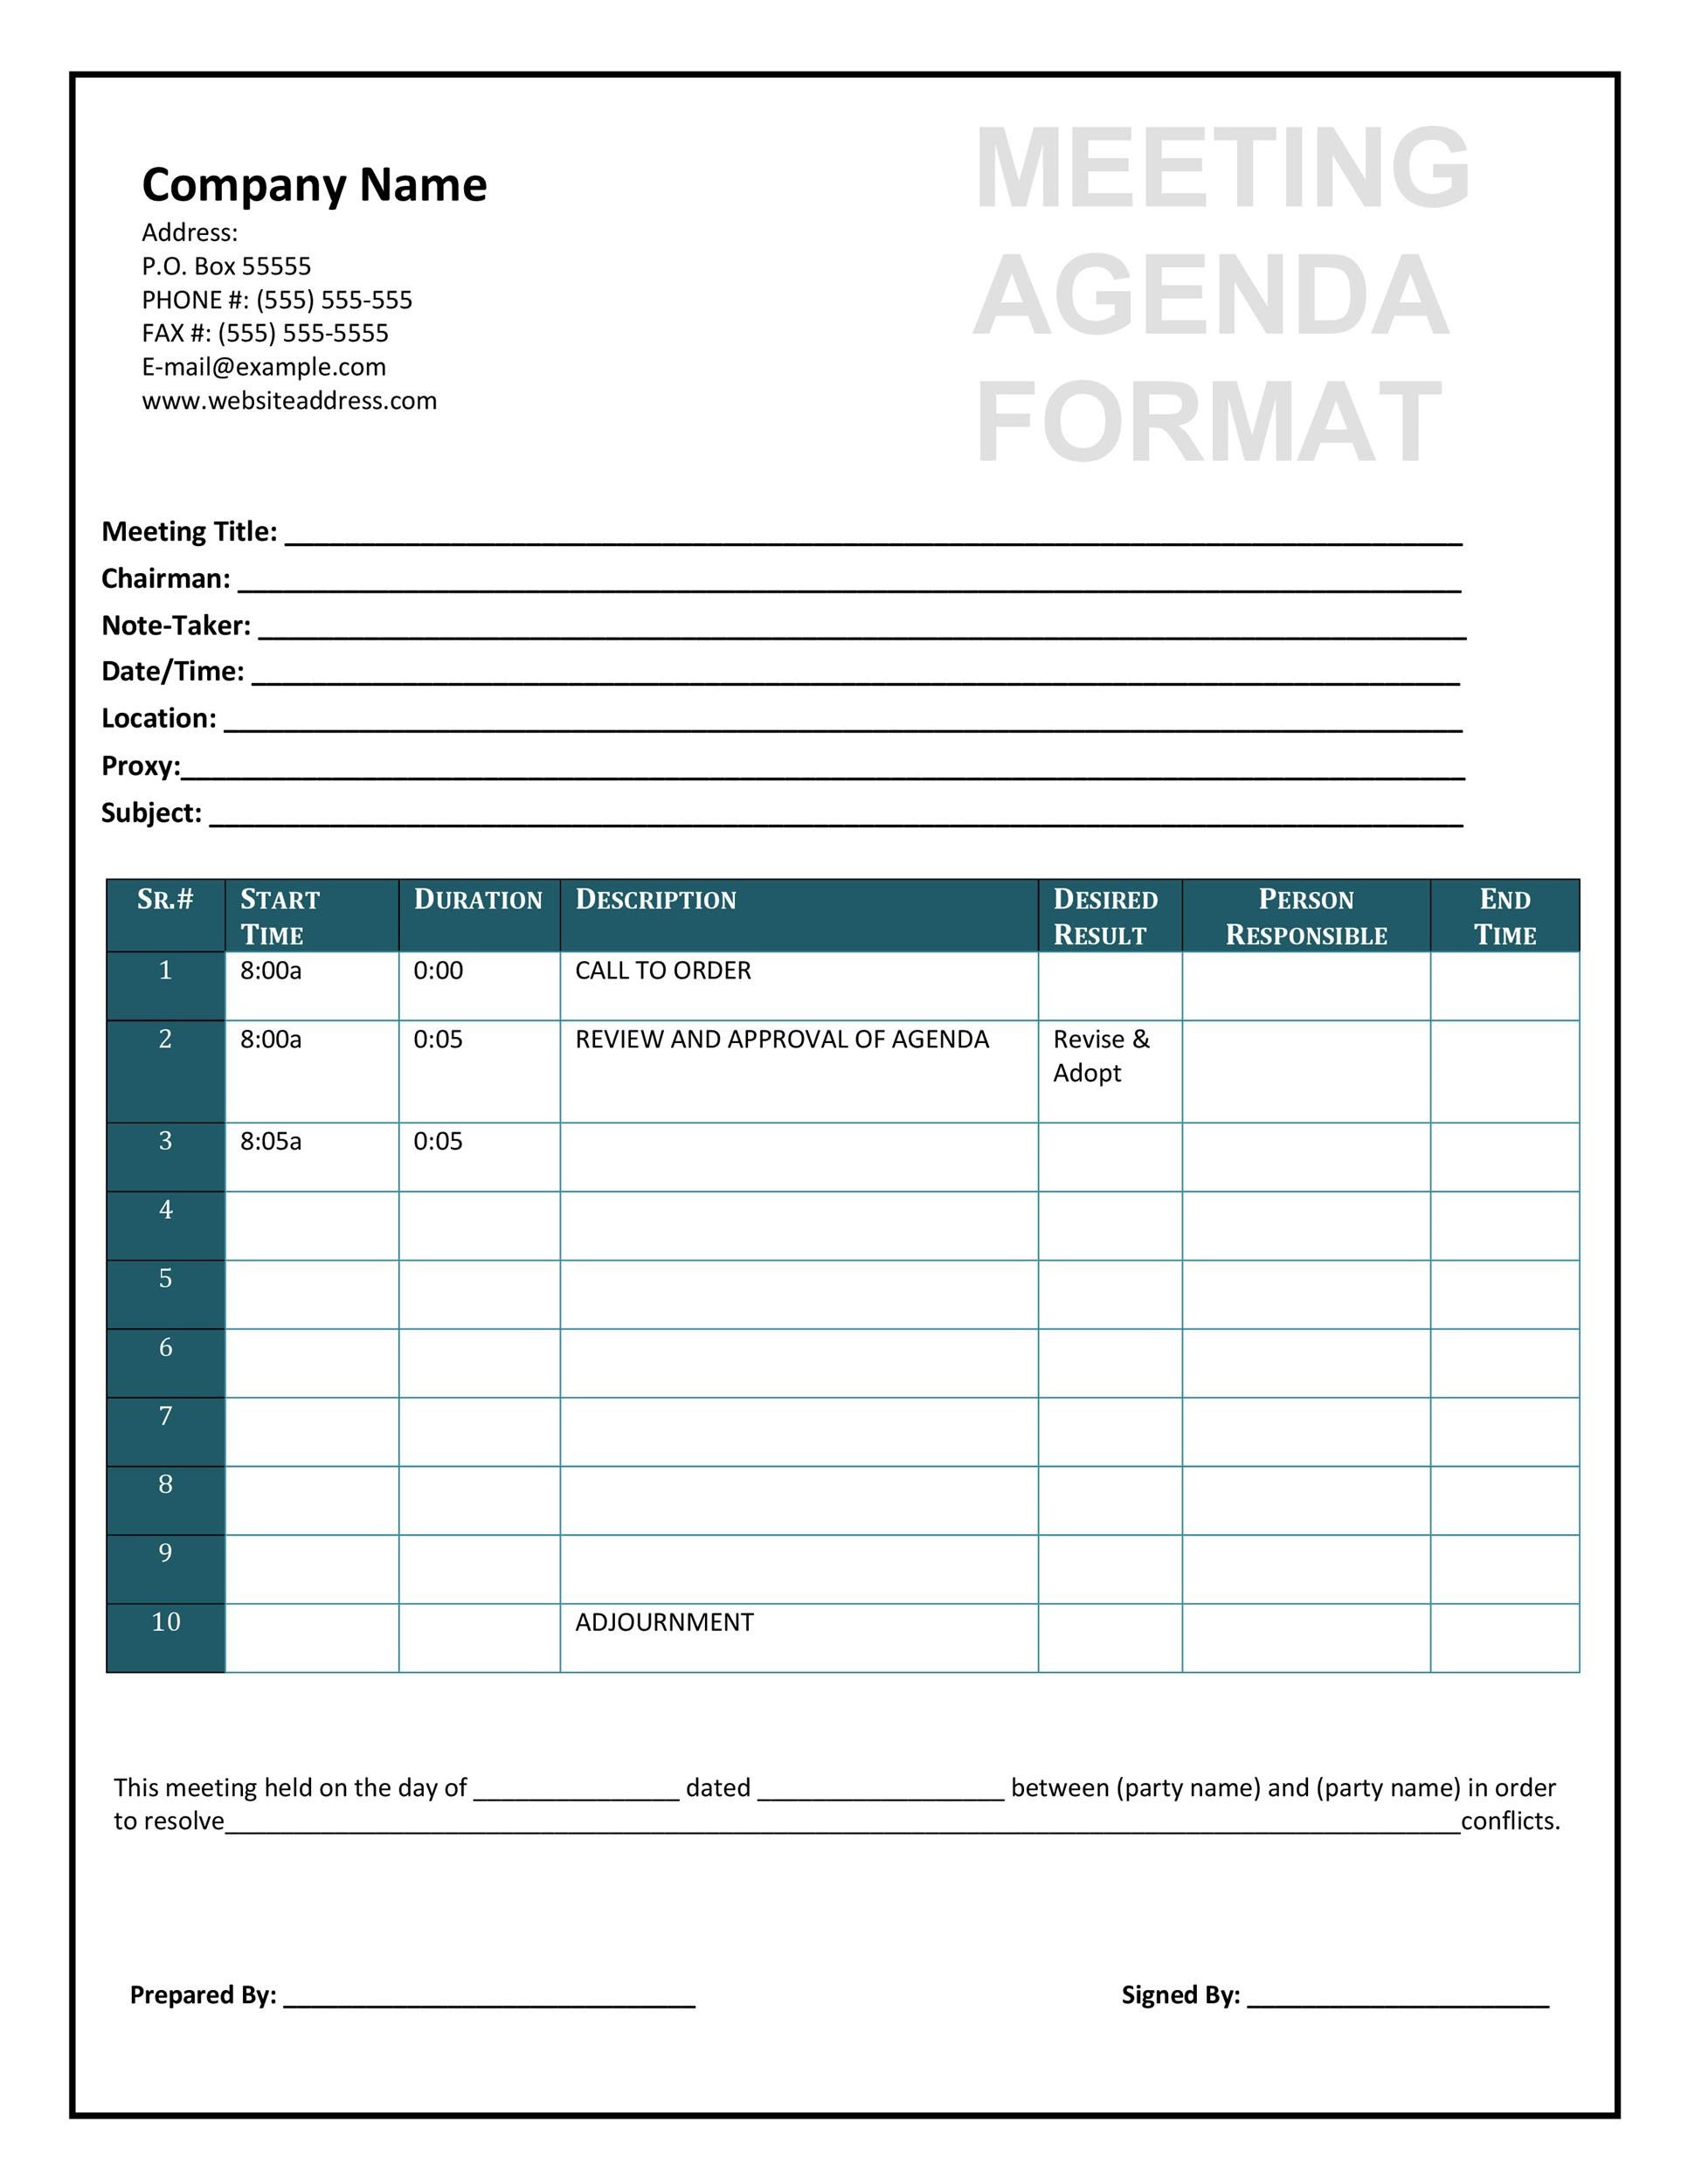 agendas-for-meetings-templates-free-professional-business-template